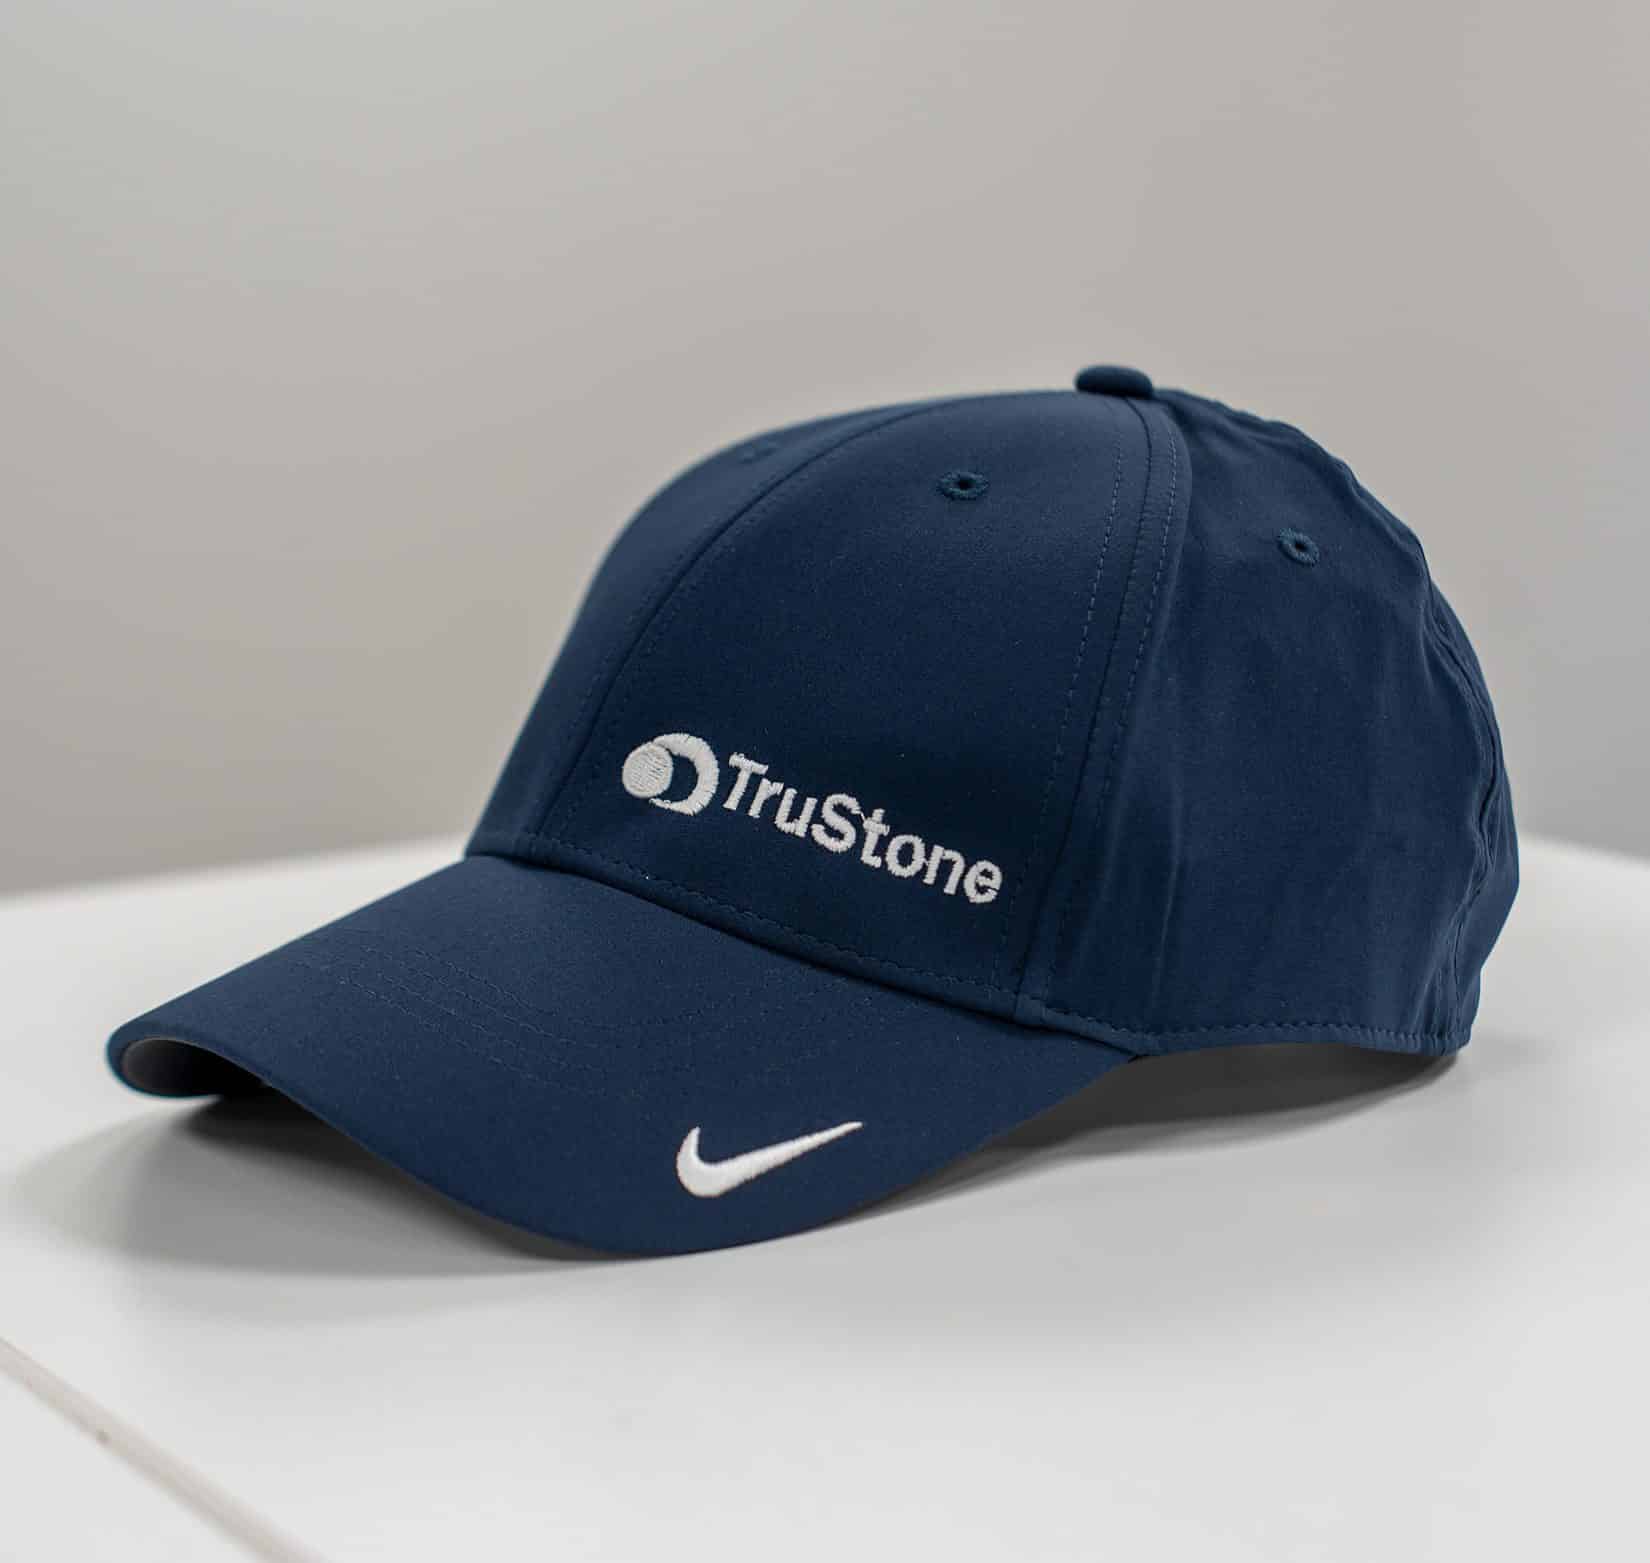 A navy blue baseball cap that has TruStone logo embroidered on it.